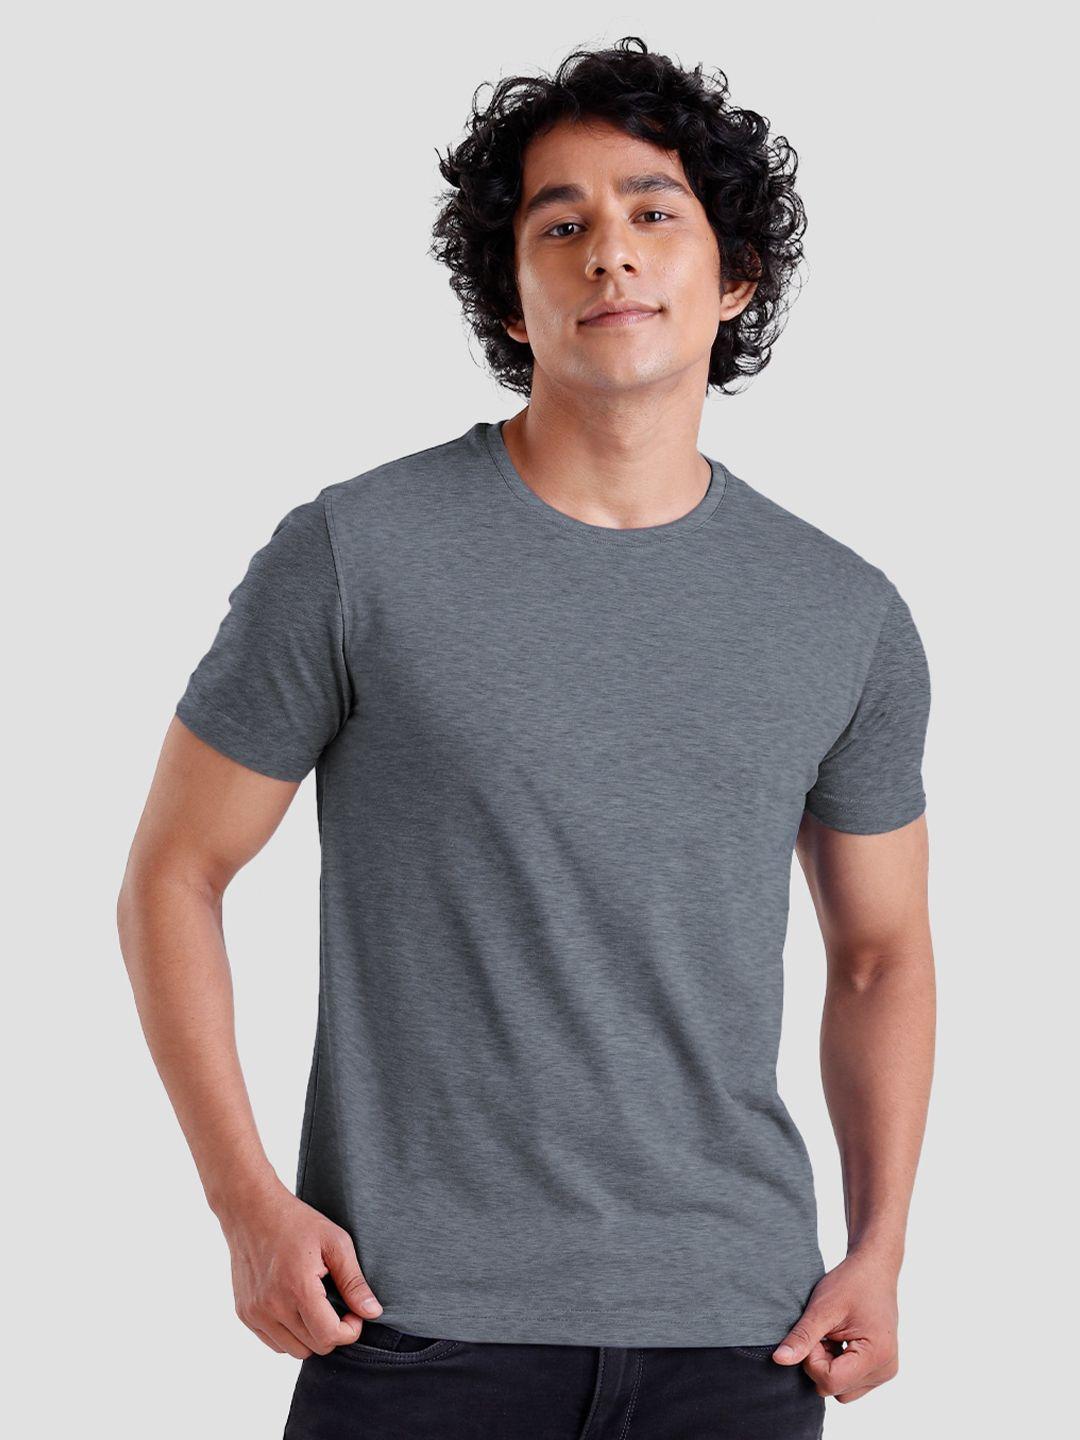 the souled store men charcoal t-shirt